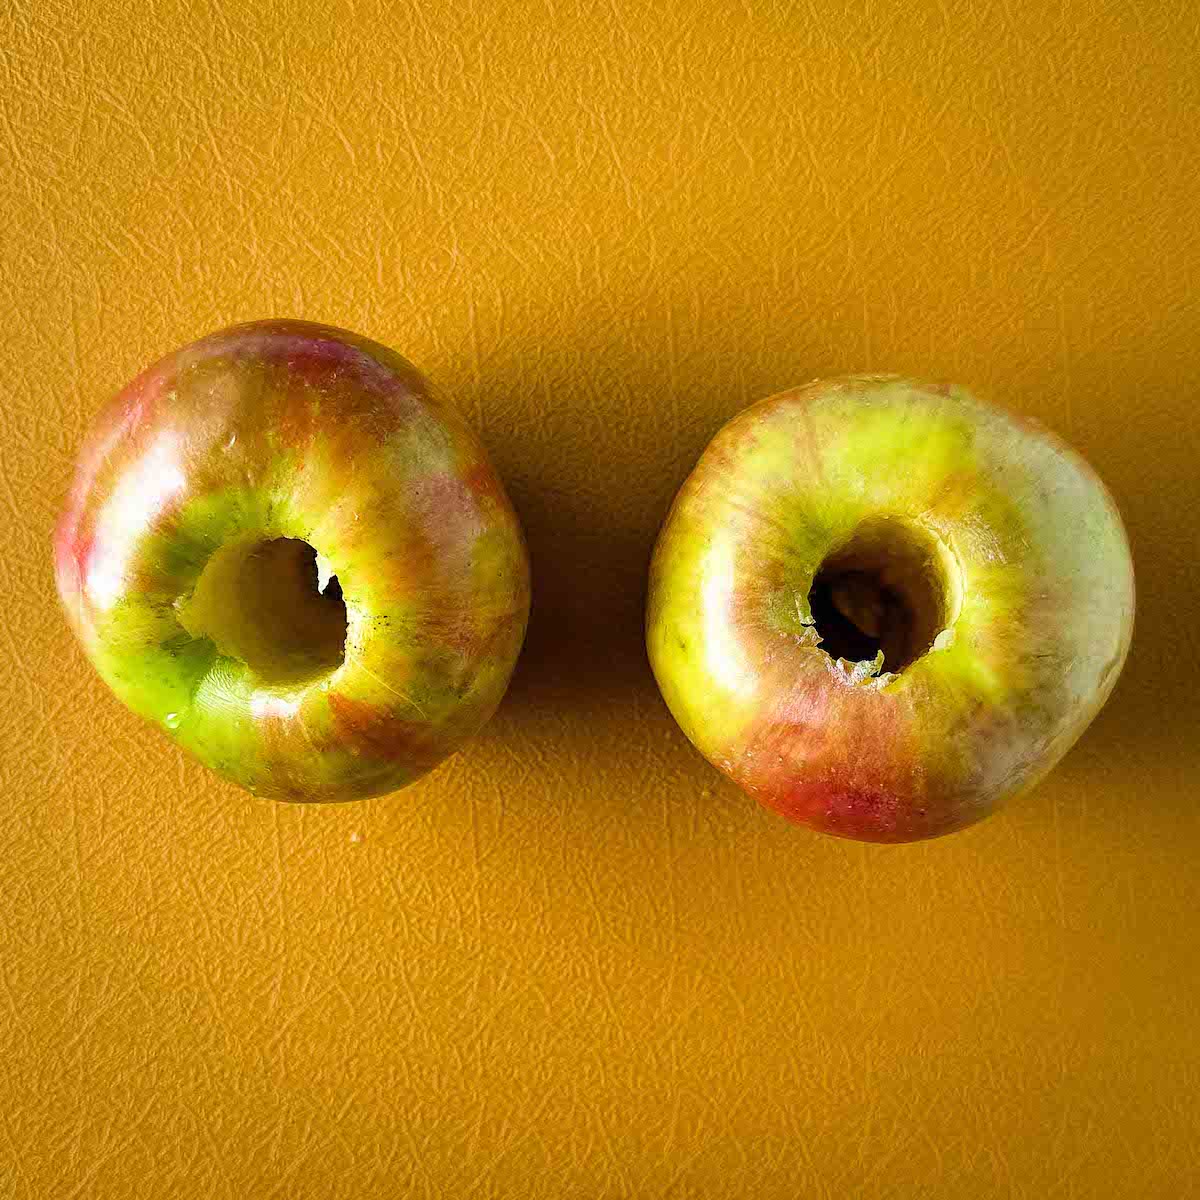 Cored apples sit on a yellow cutting board.